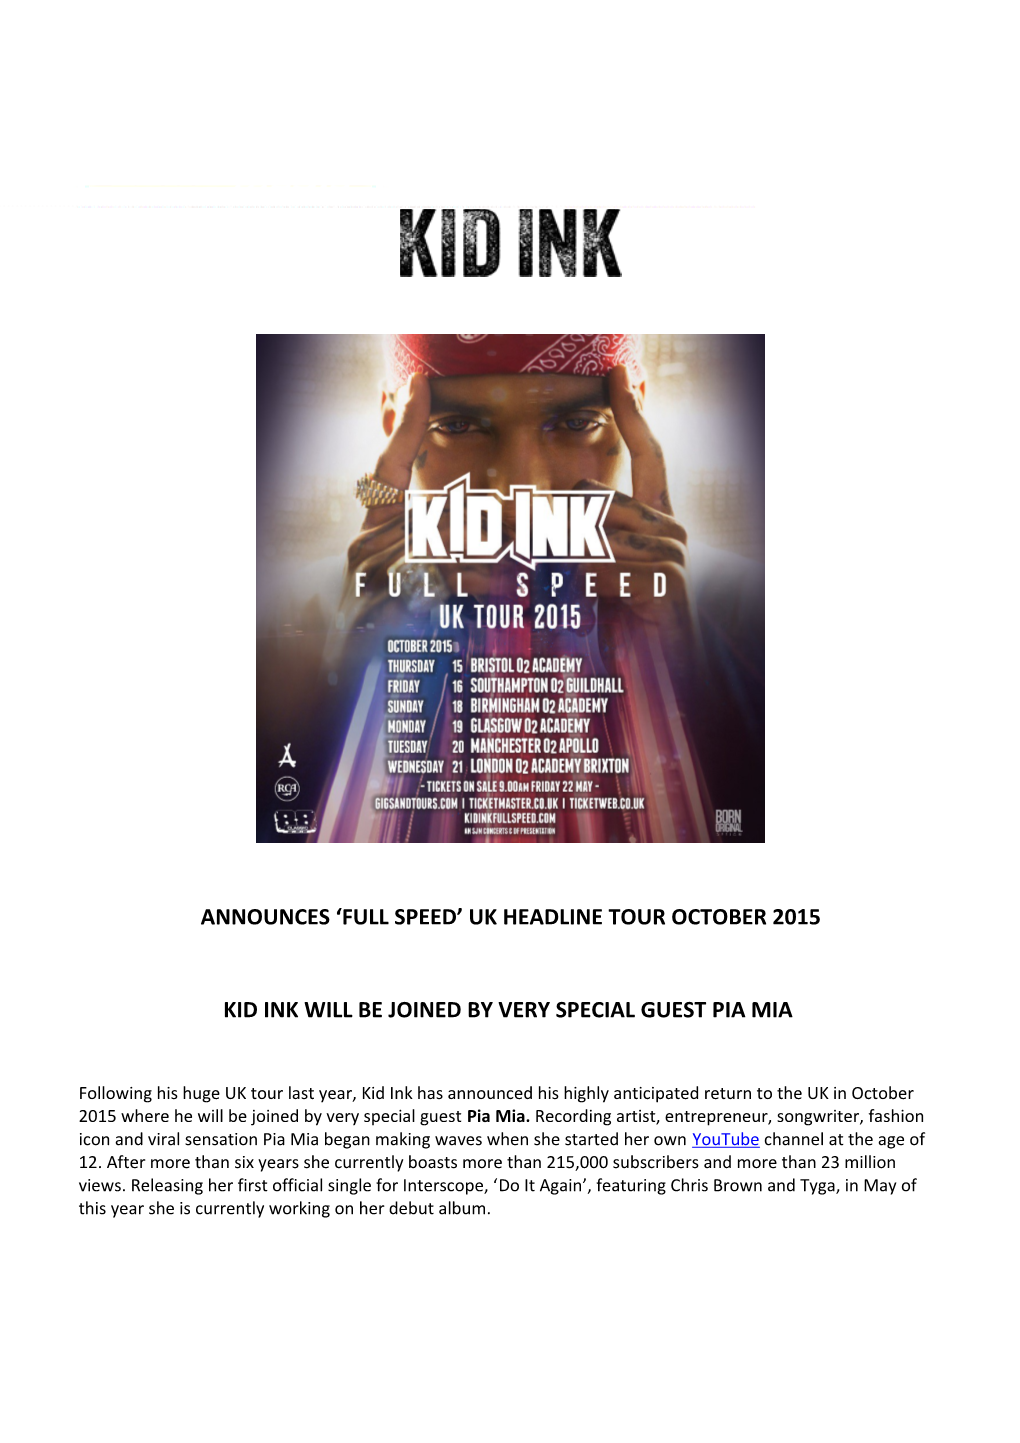 Kid Ink Will Be Joined by Very Special Guest Pia Mia